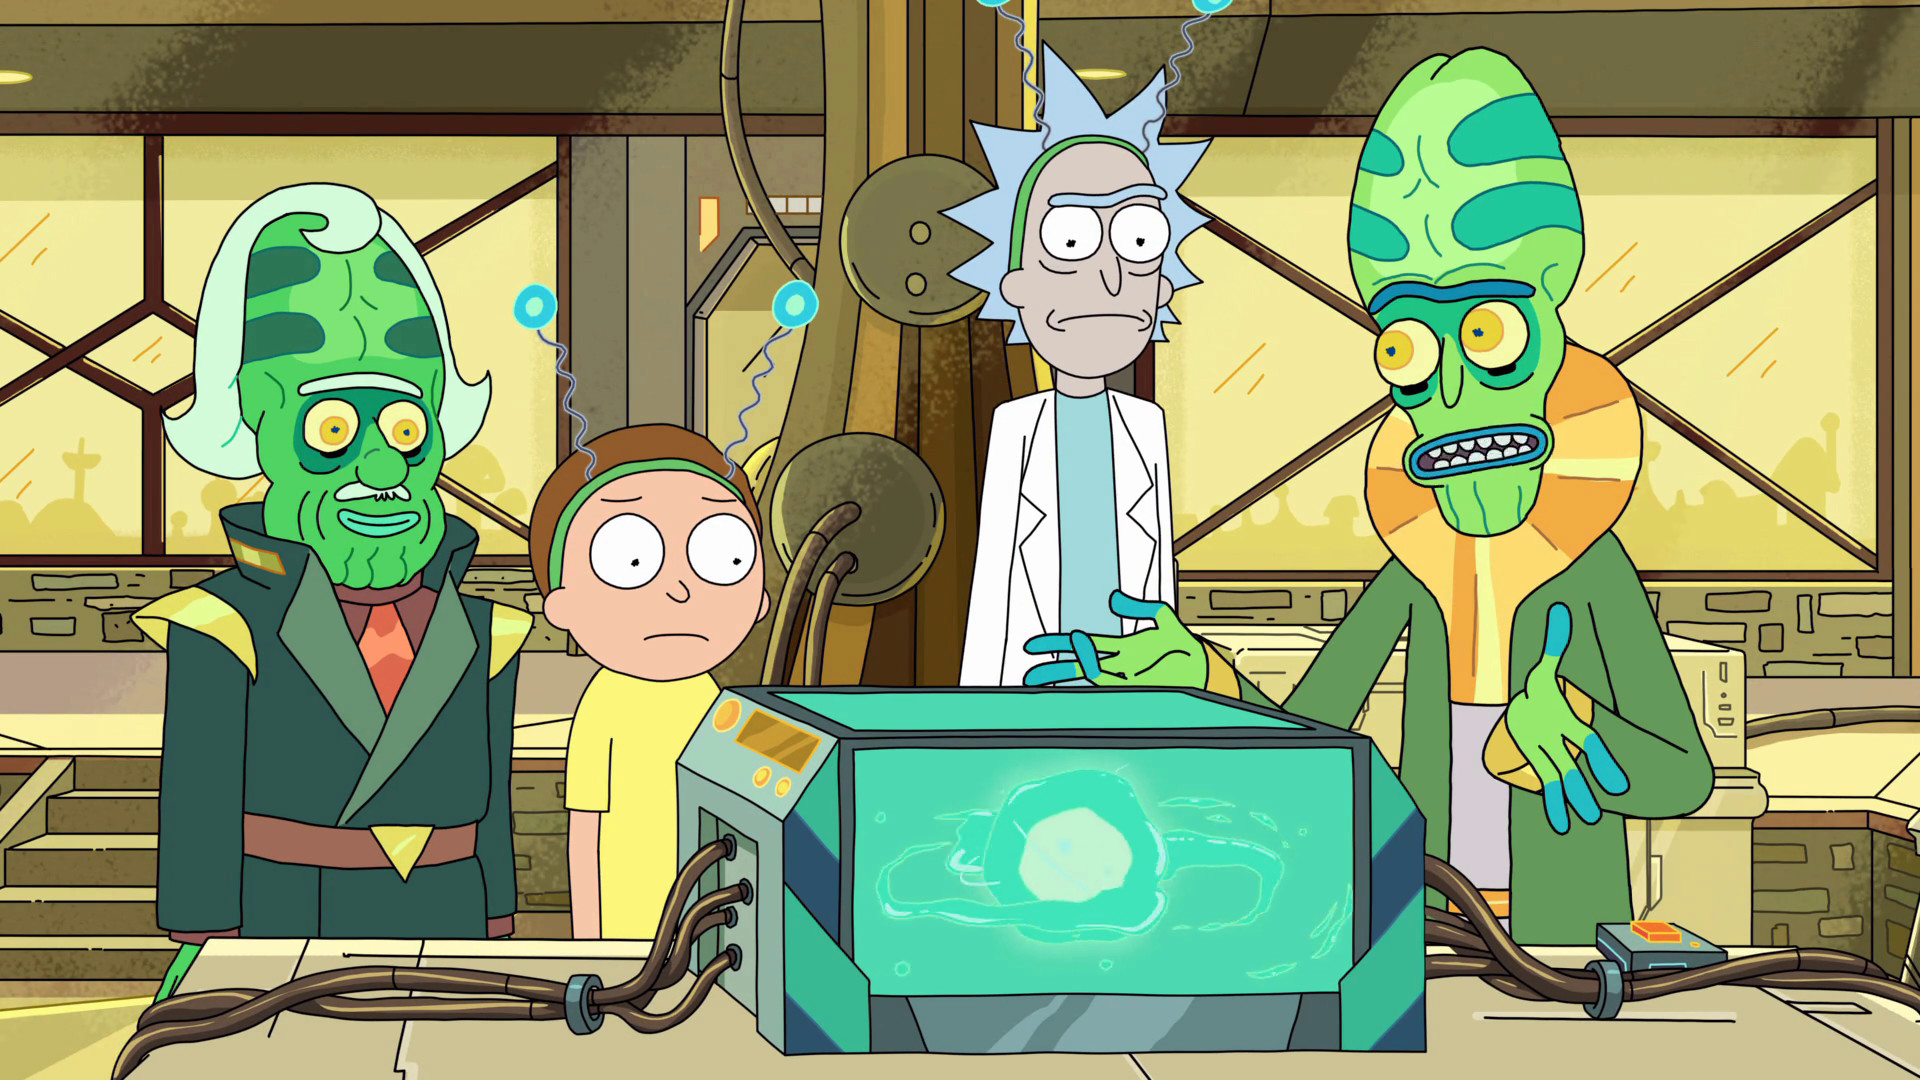 1920x1080 The Ricks Must Be Crazy | Rick and Morty Wiki | FANDOM powered by Wikia